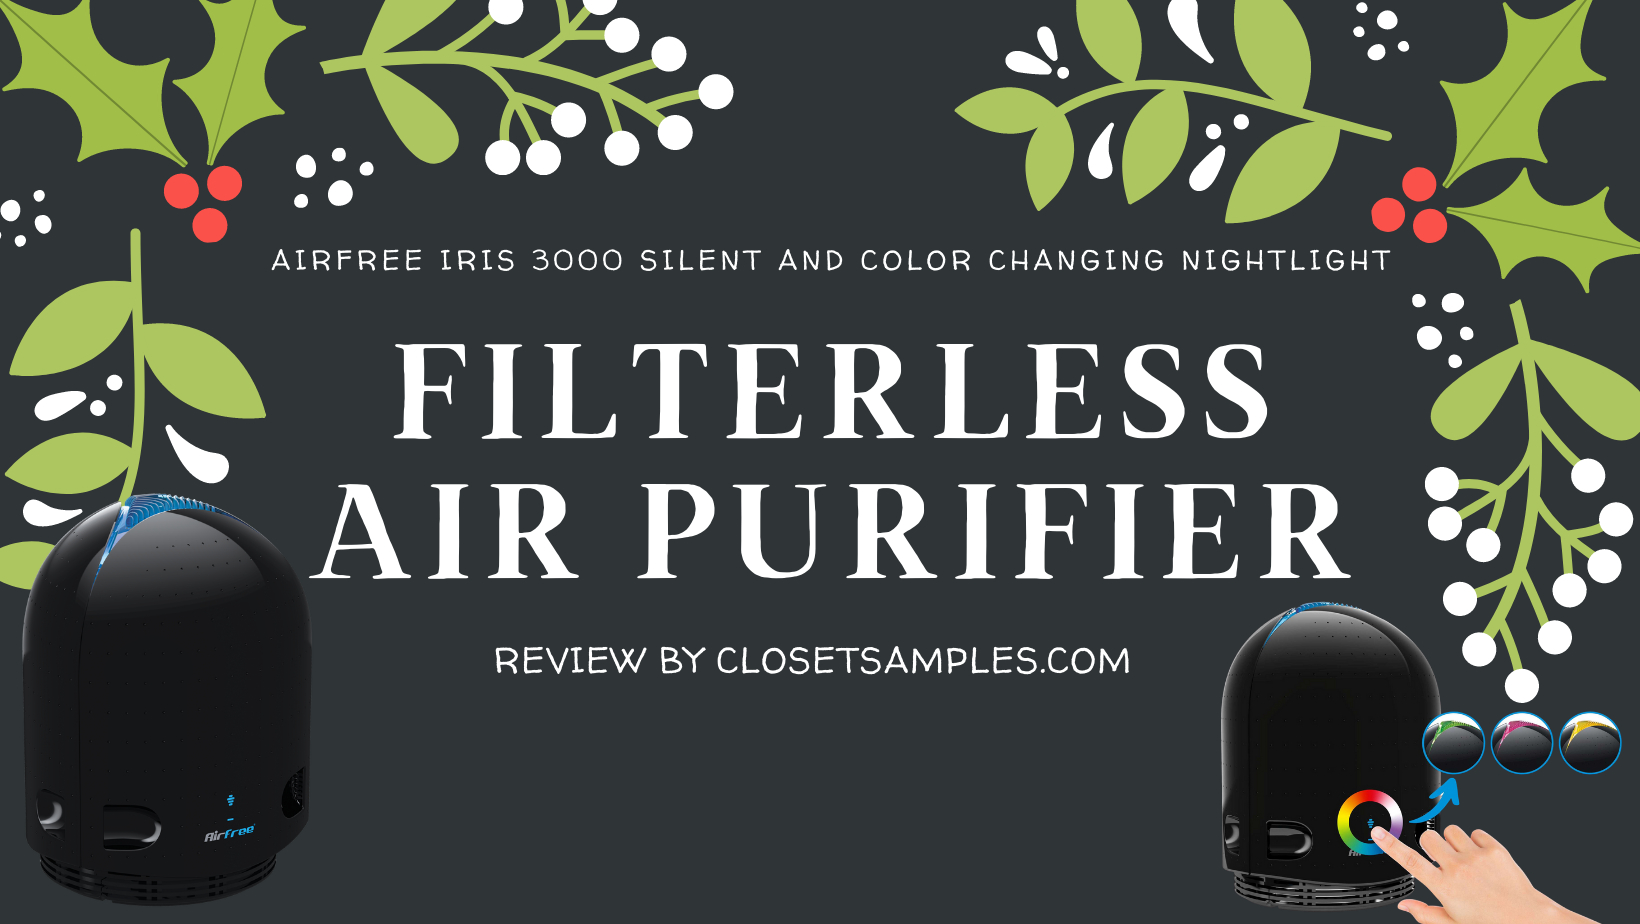 Airfree-Iris-3000-Silent-Filterless-Air-Purifier-and-Color-Changing-Nightlight-review-closetsamples.png